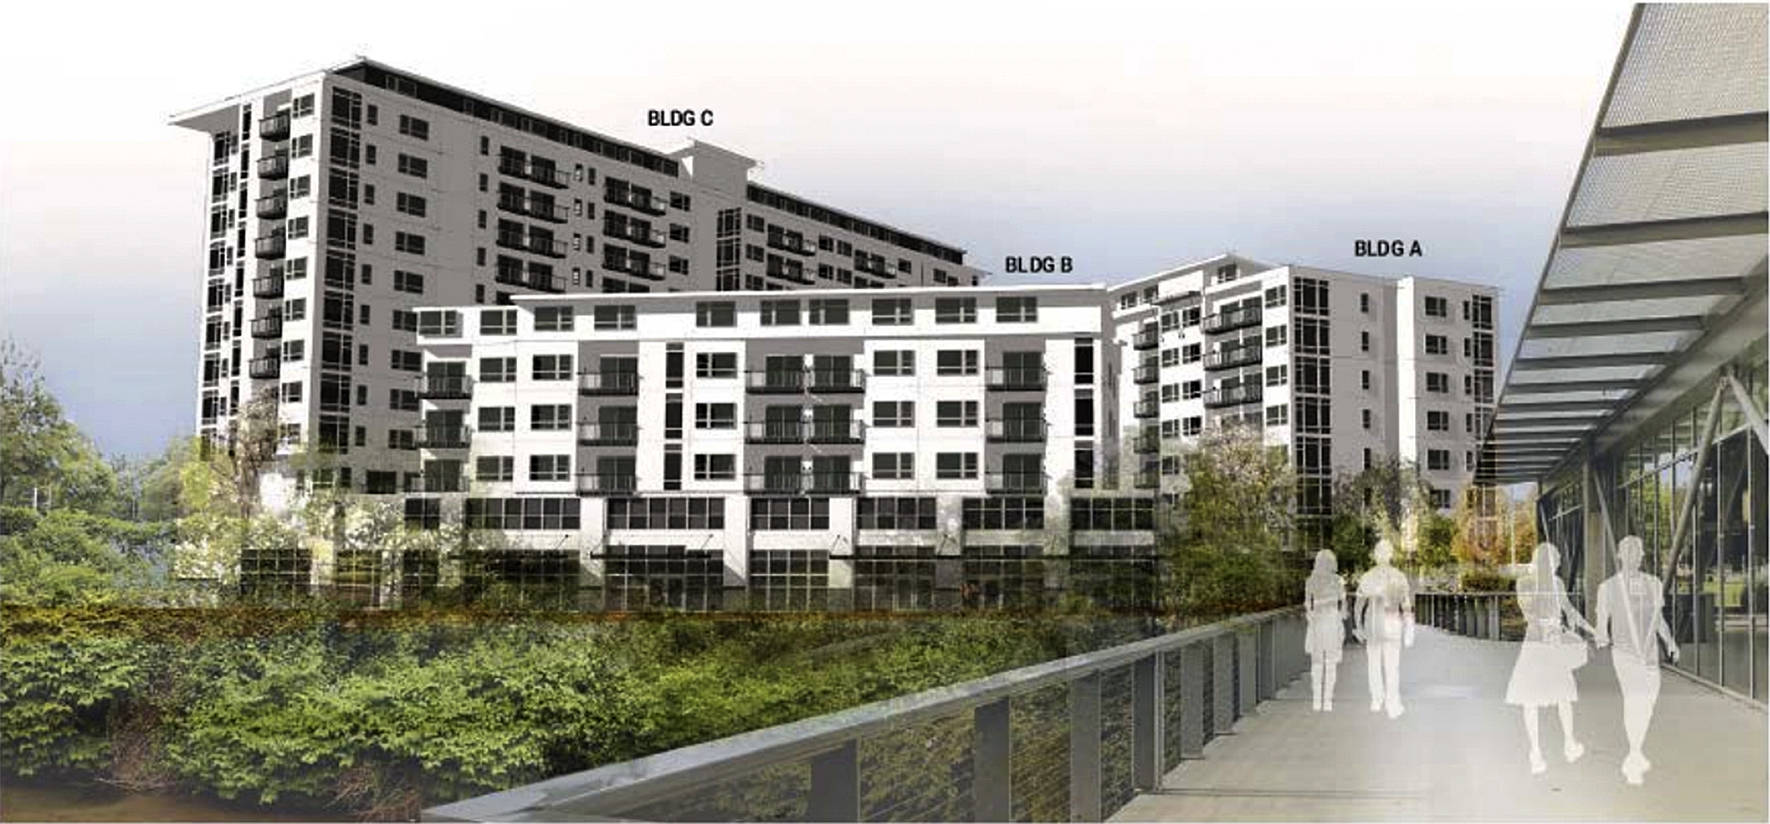 Renderings of the redevelopement of 200 Mill Avenue South, taken from the new contract. Courtesy of city of Renton.